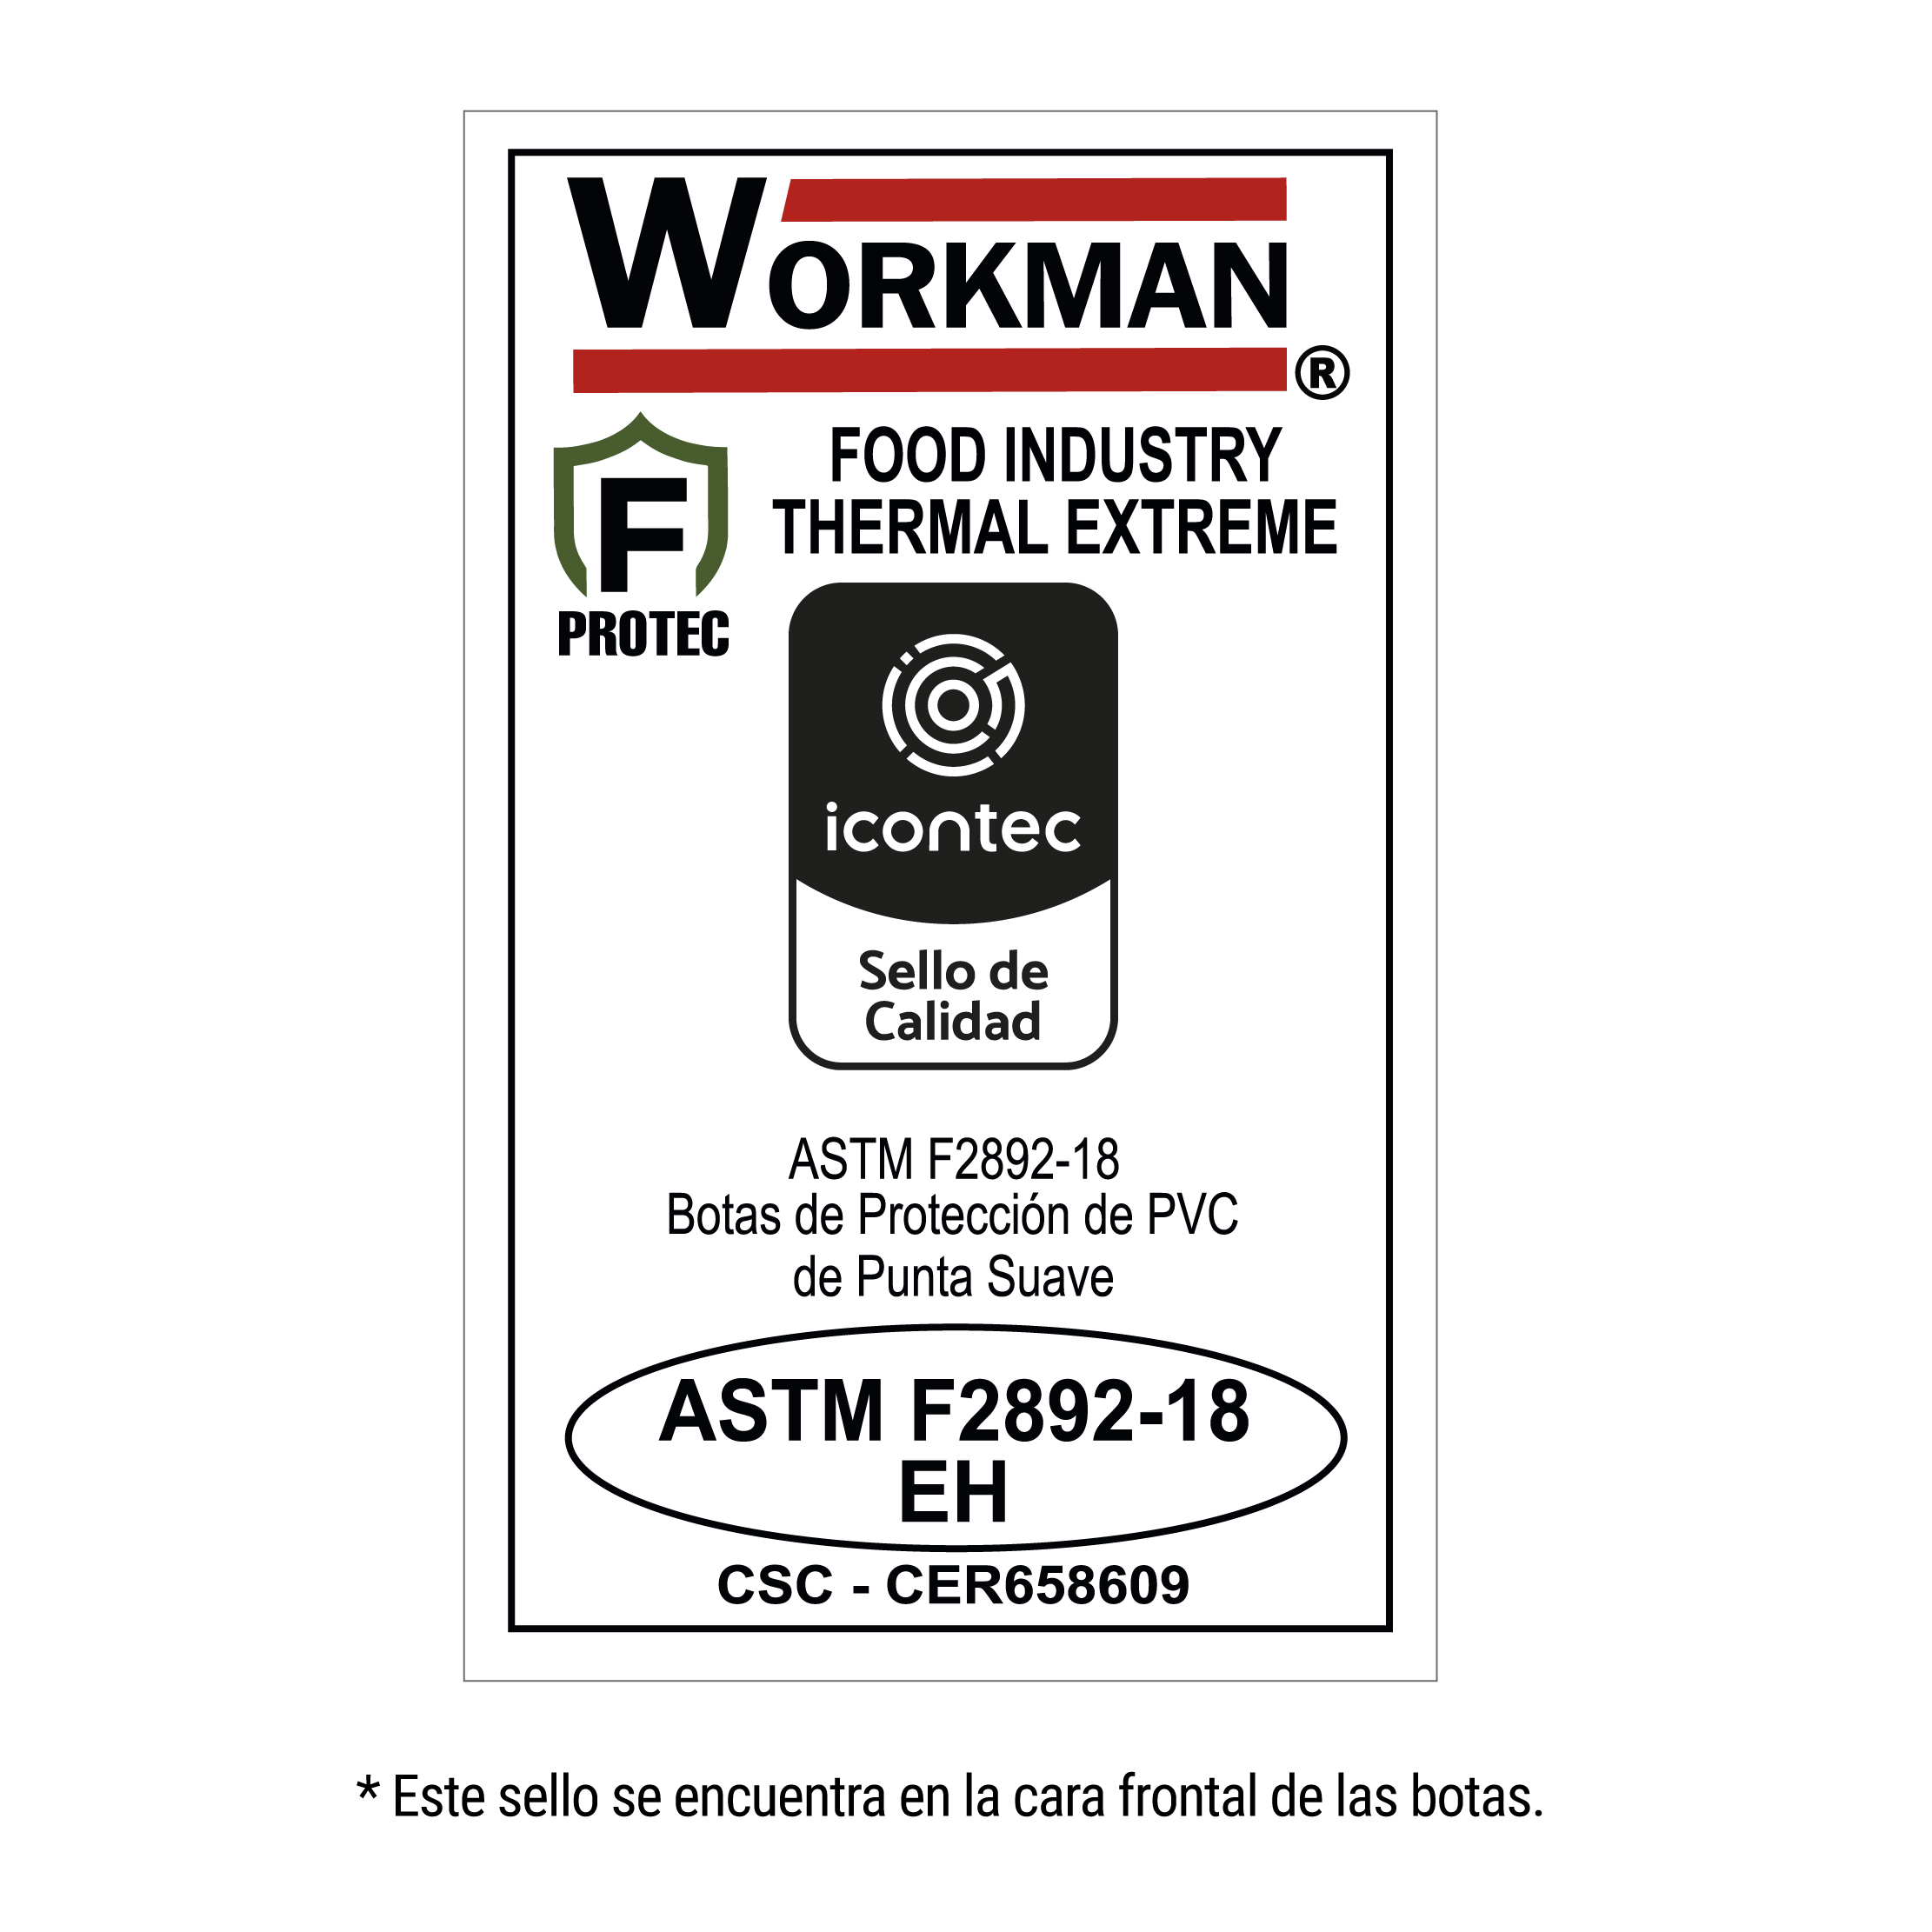 Workman Food Industry Extreme Thermal Amarilla